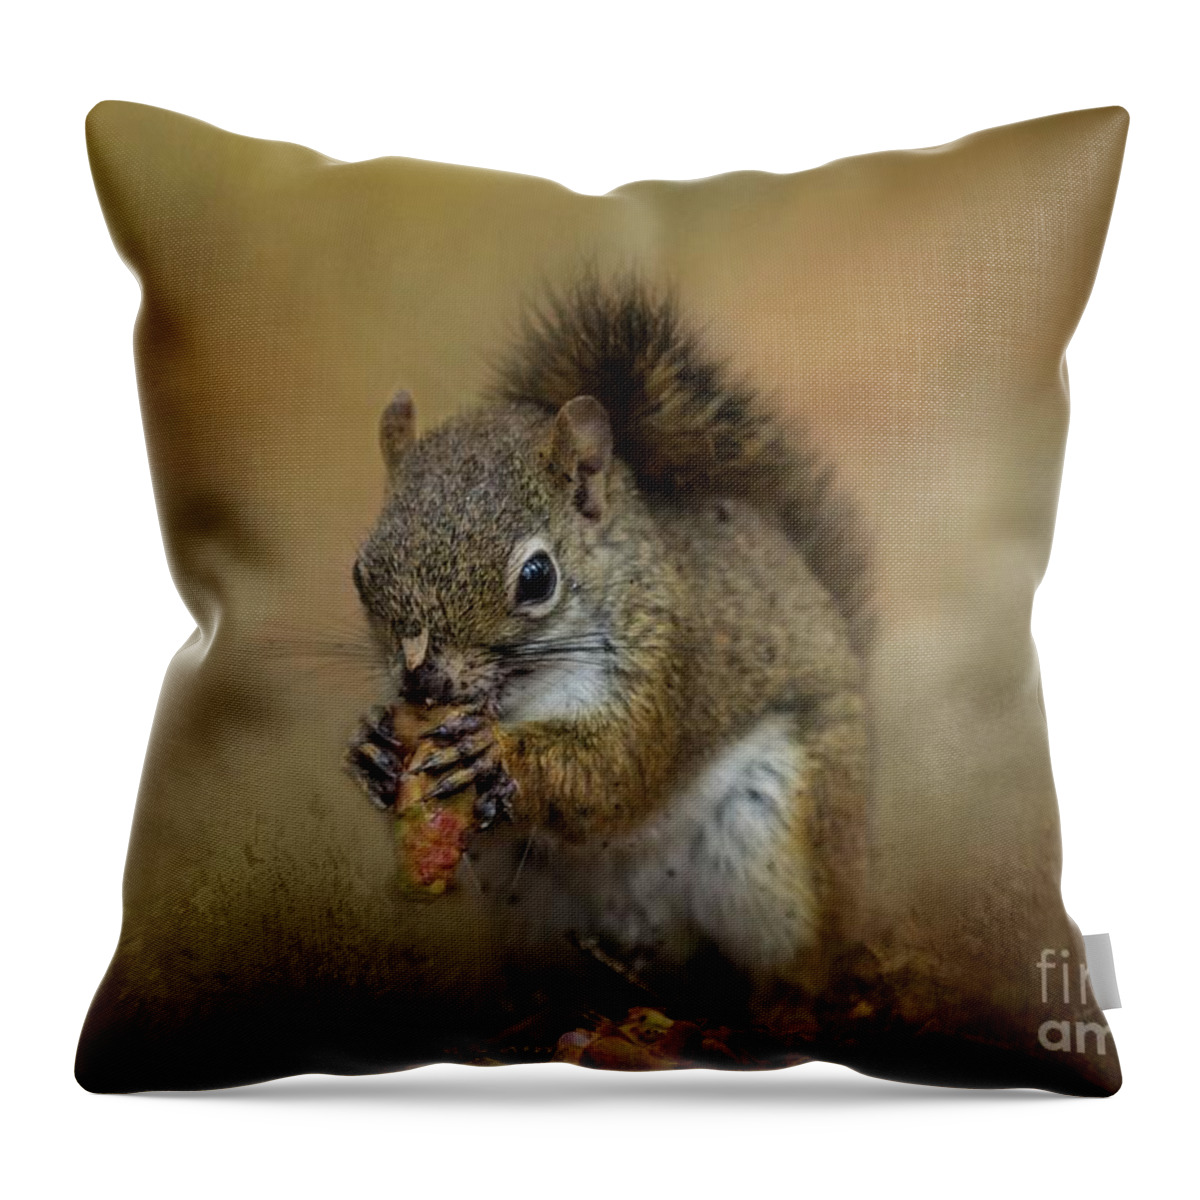 Red Squirrel Throw Pillow featuring the photograph Yum Yum by Eva Lechner